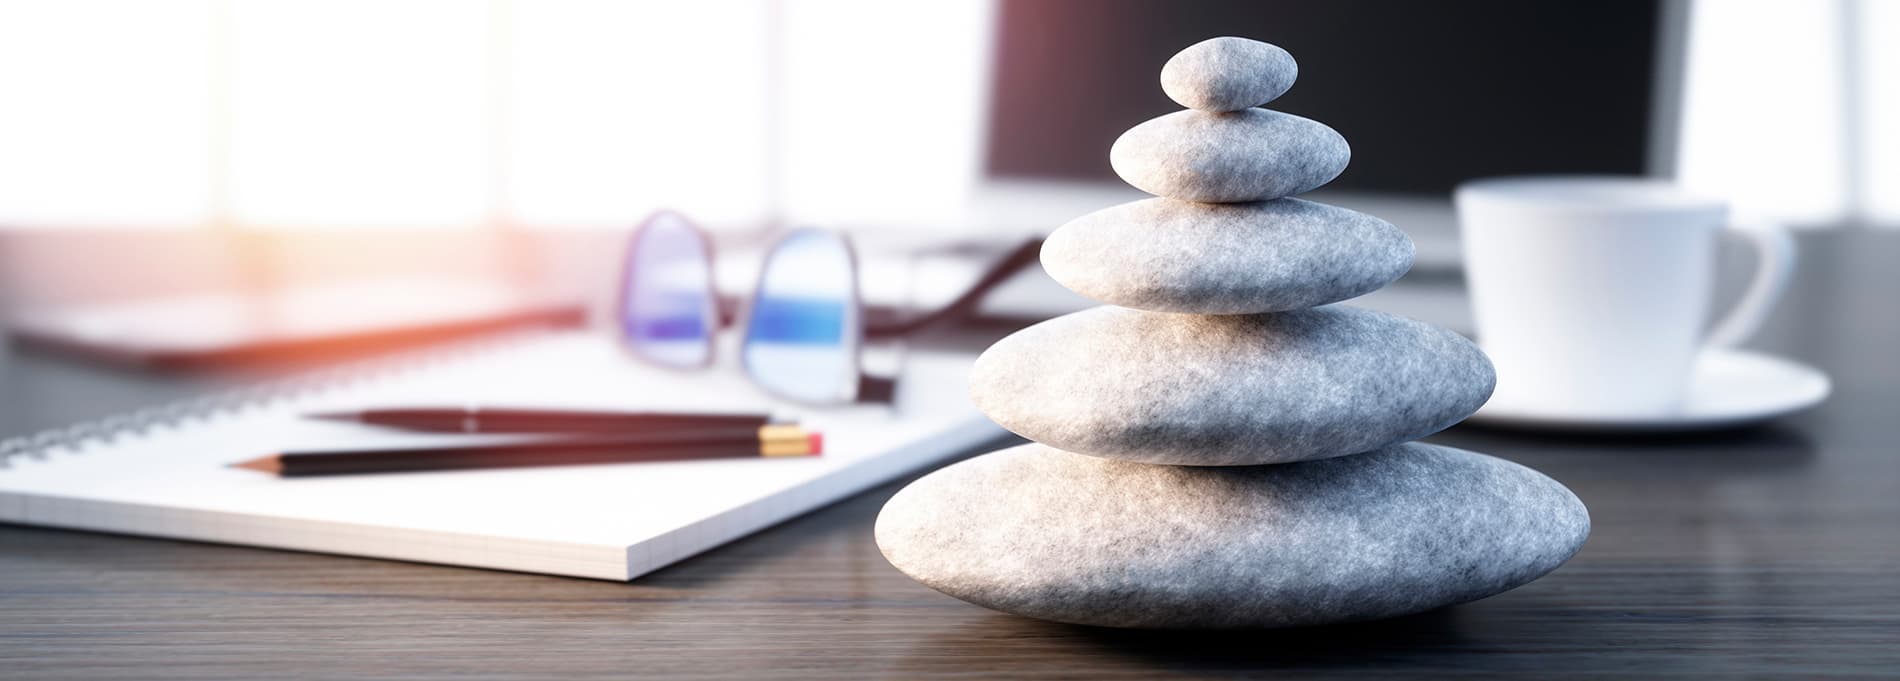 A small tower of stacked smooth stones by a notebook and glasses